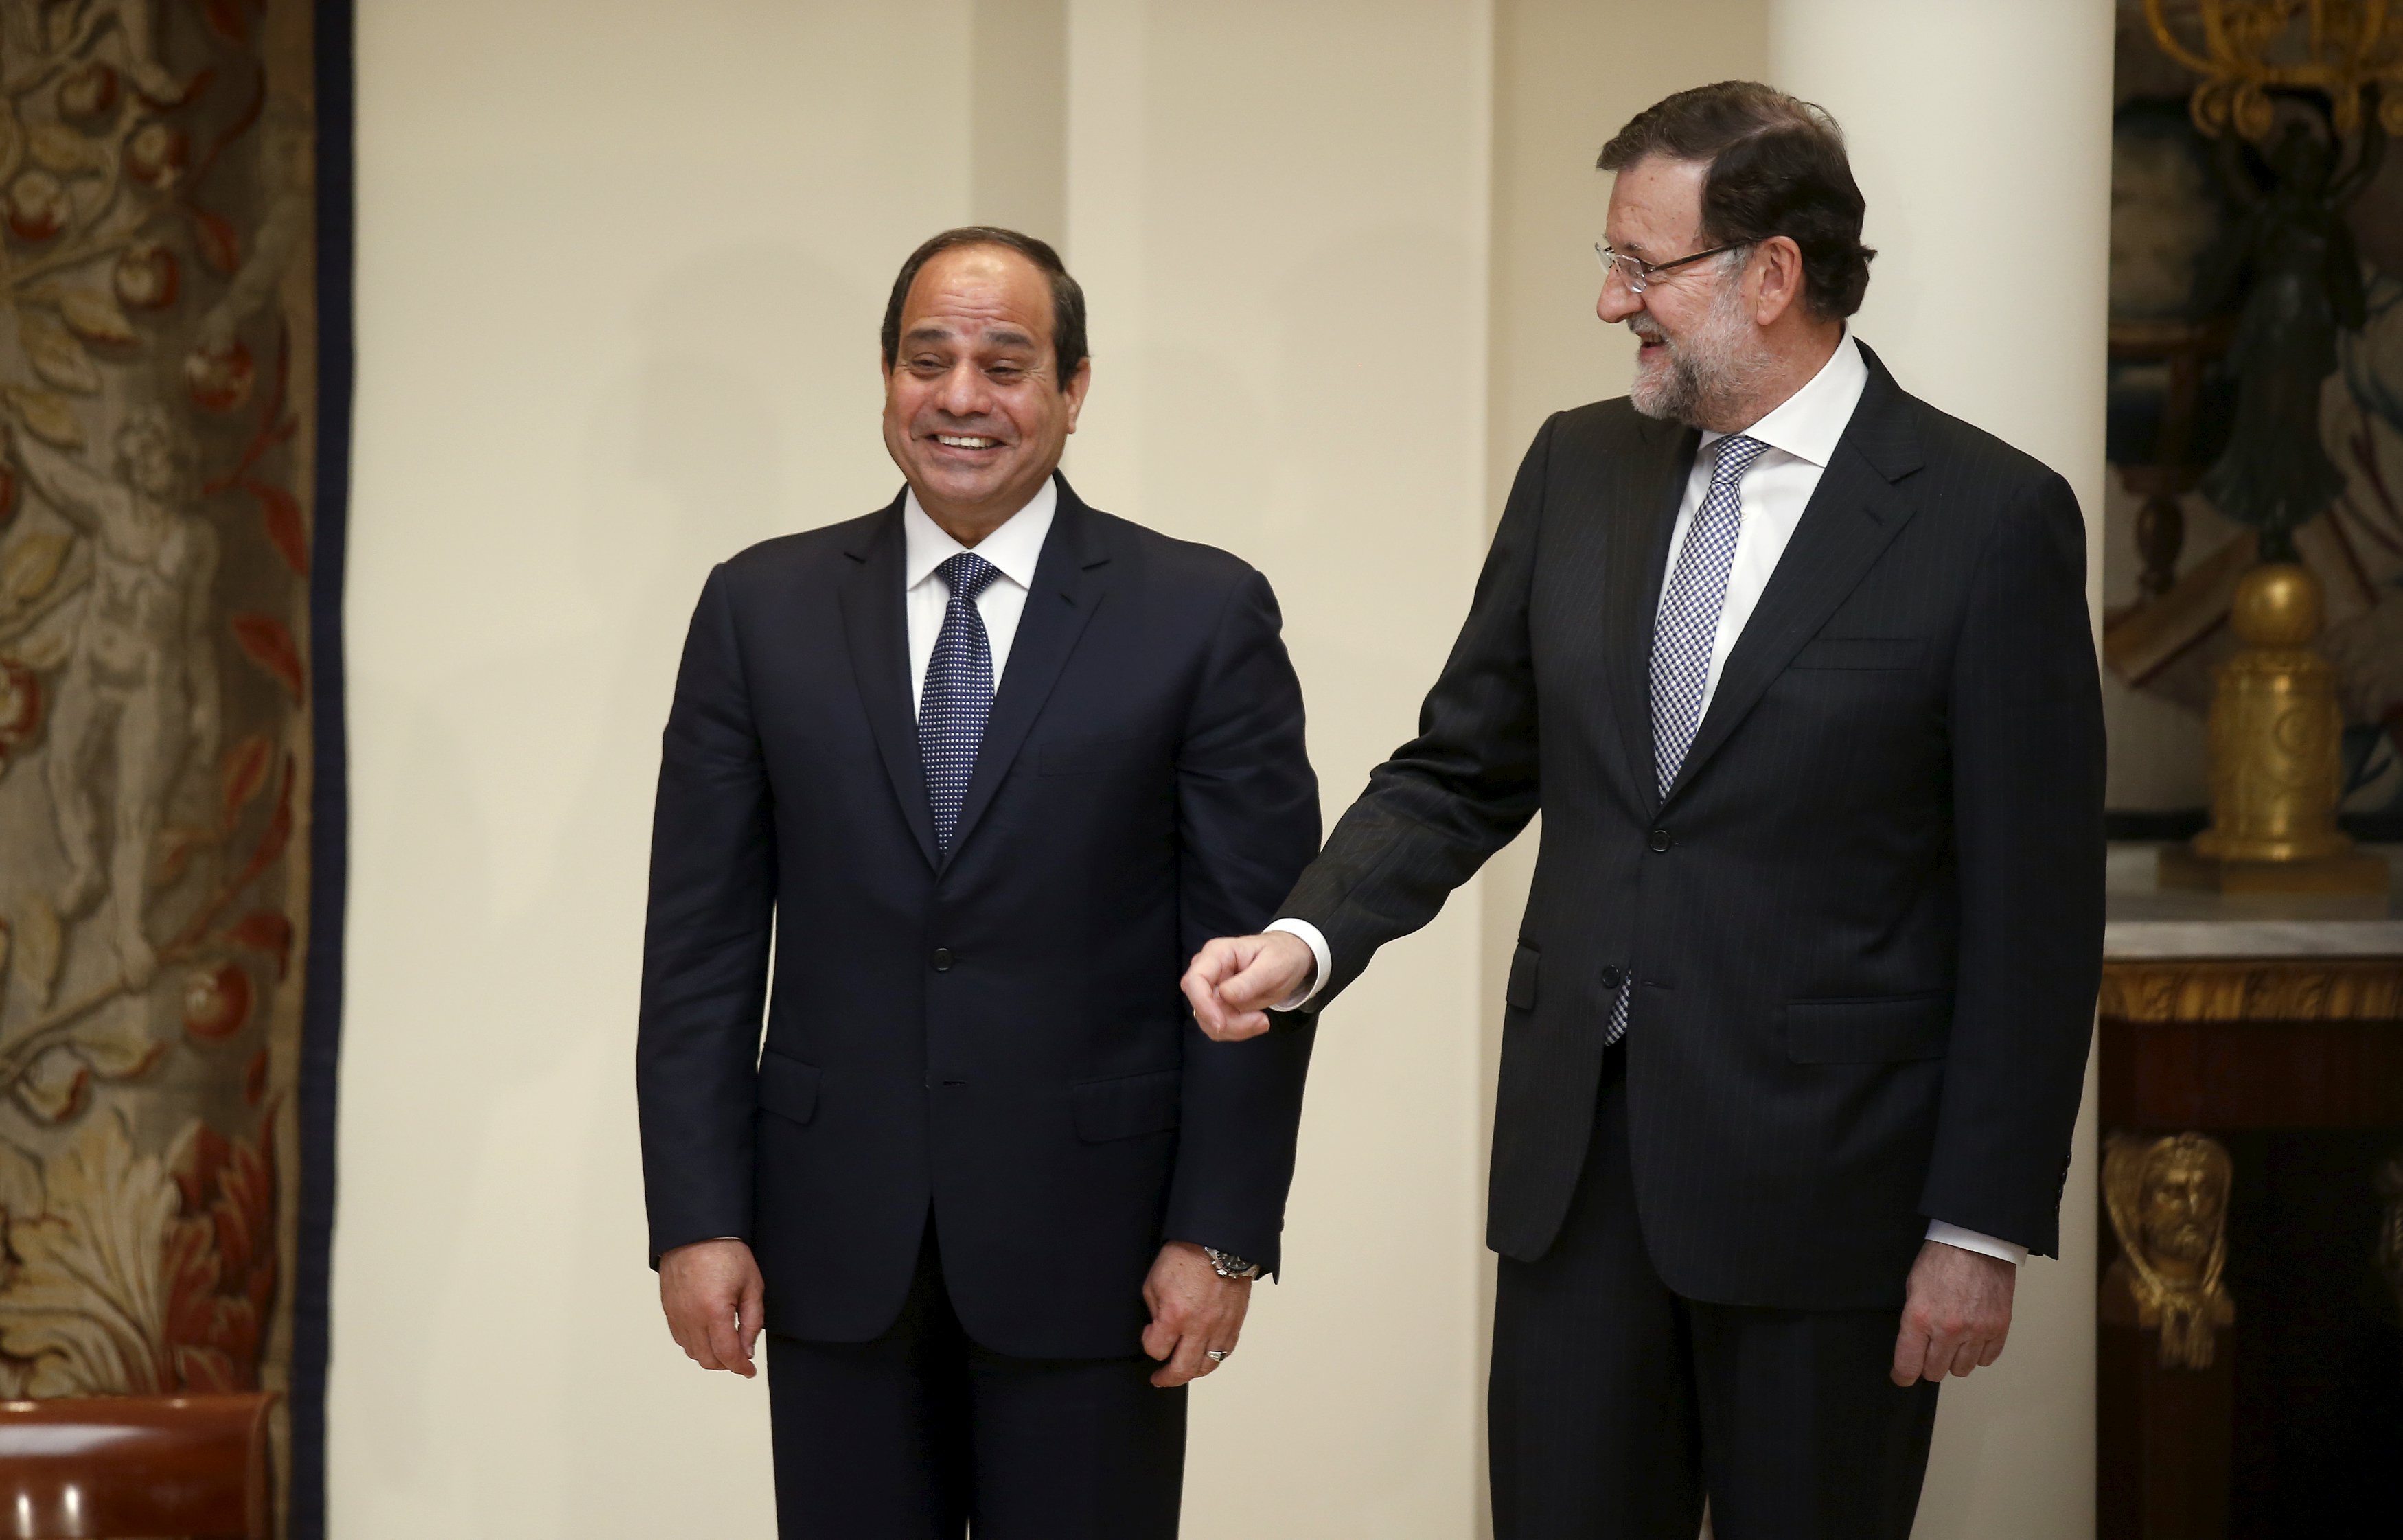 Spain's Prime Minister Mariano Rajoy (R) shares a laugh with Egyptian President Abdel Fattah al-Sisi during the signing of bilateral agreements at Moncloa palace in Madrid, Spain, April 30, 2015. REUTERS/Andrea Comas